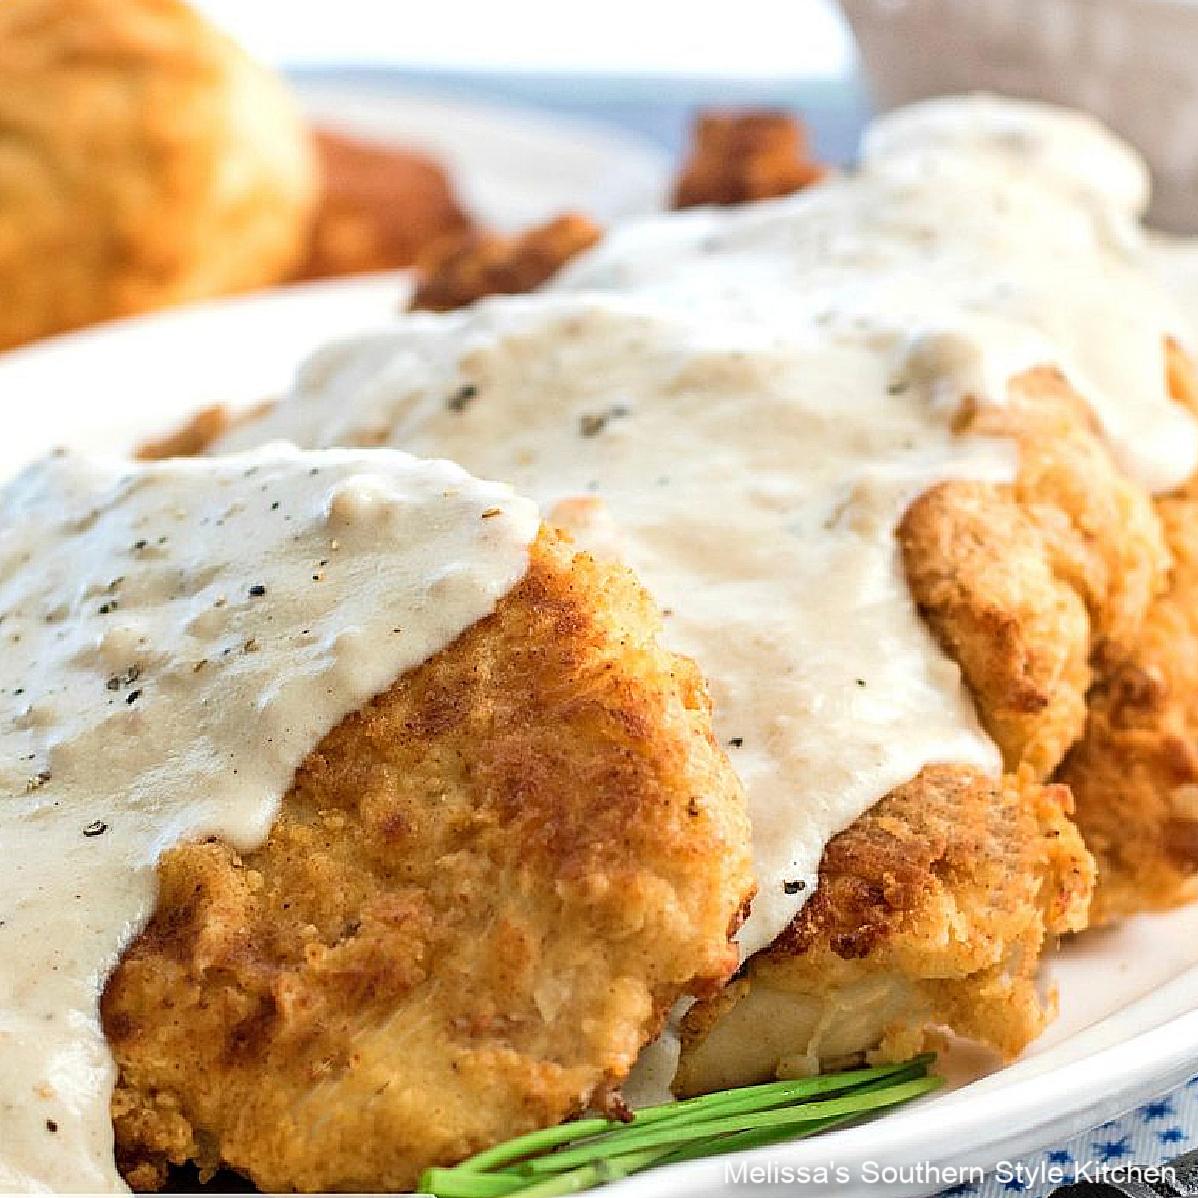  This Southern classic just got an upgrade with a homemade gravy.